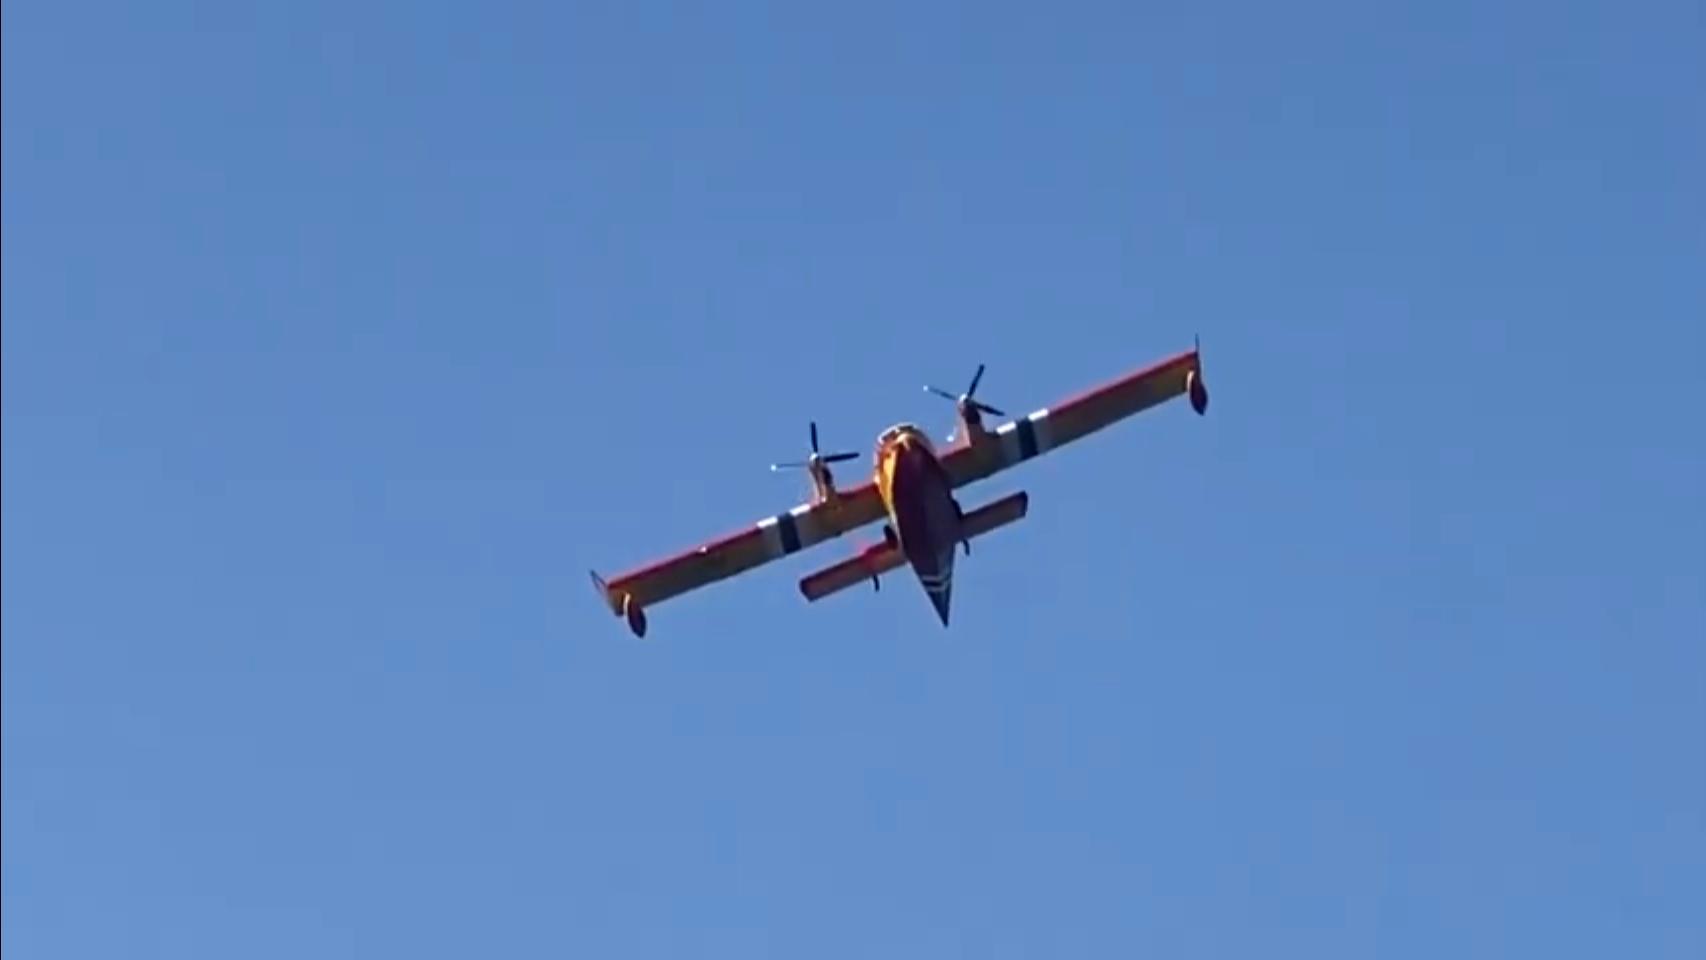 A large yellow airplane is flying through a blue sky